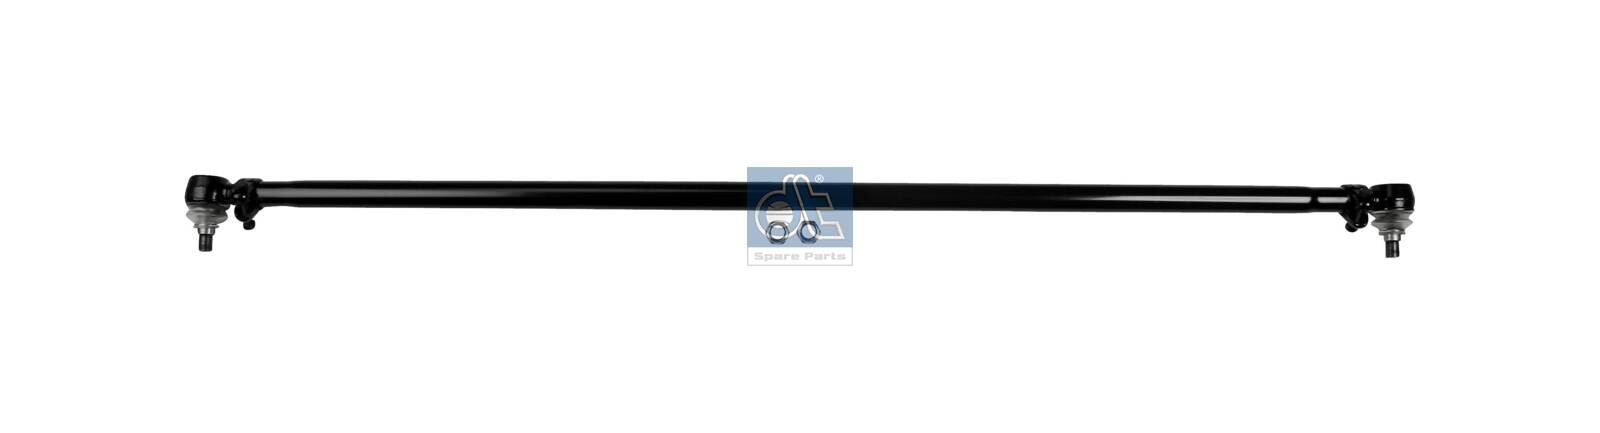 DT Spare Parts 4.64591 Rod Assembly 970 330 01 03